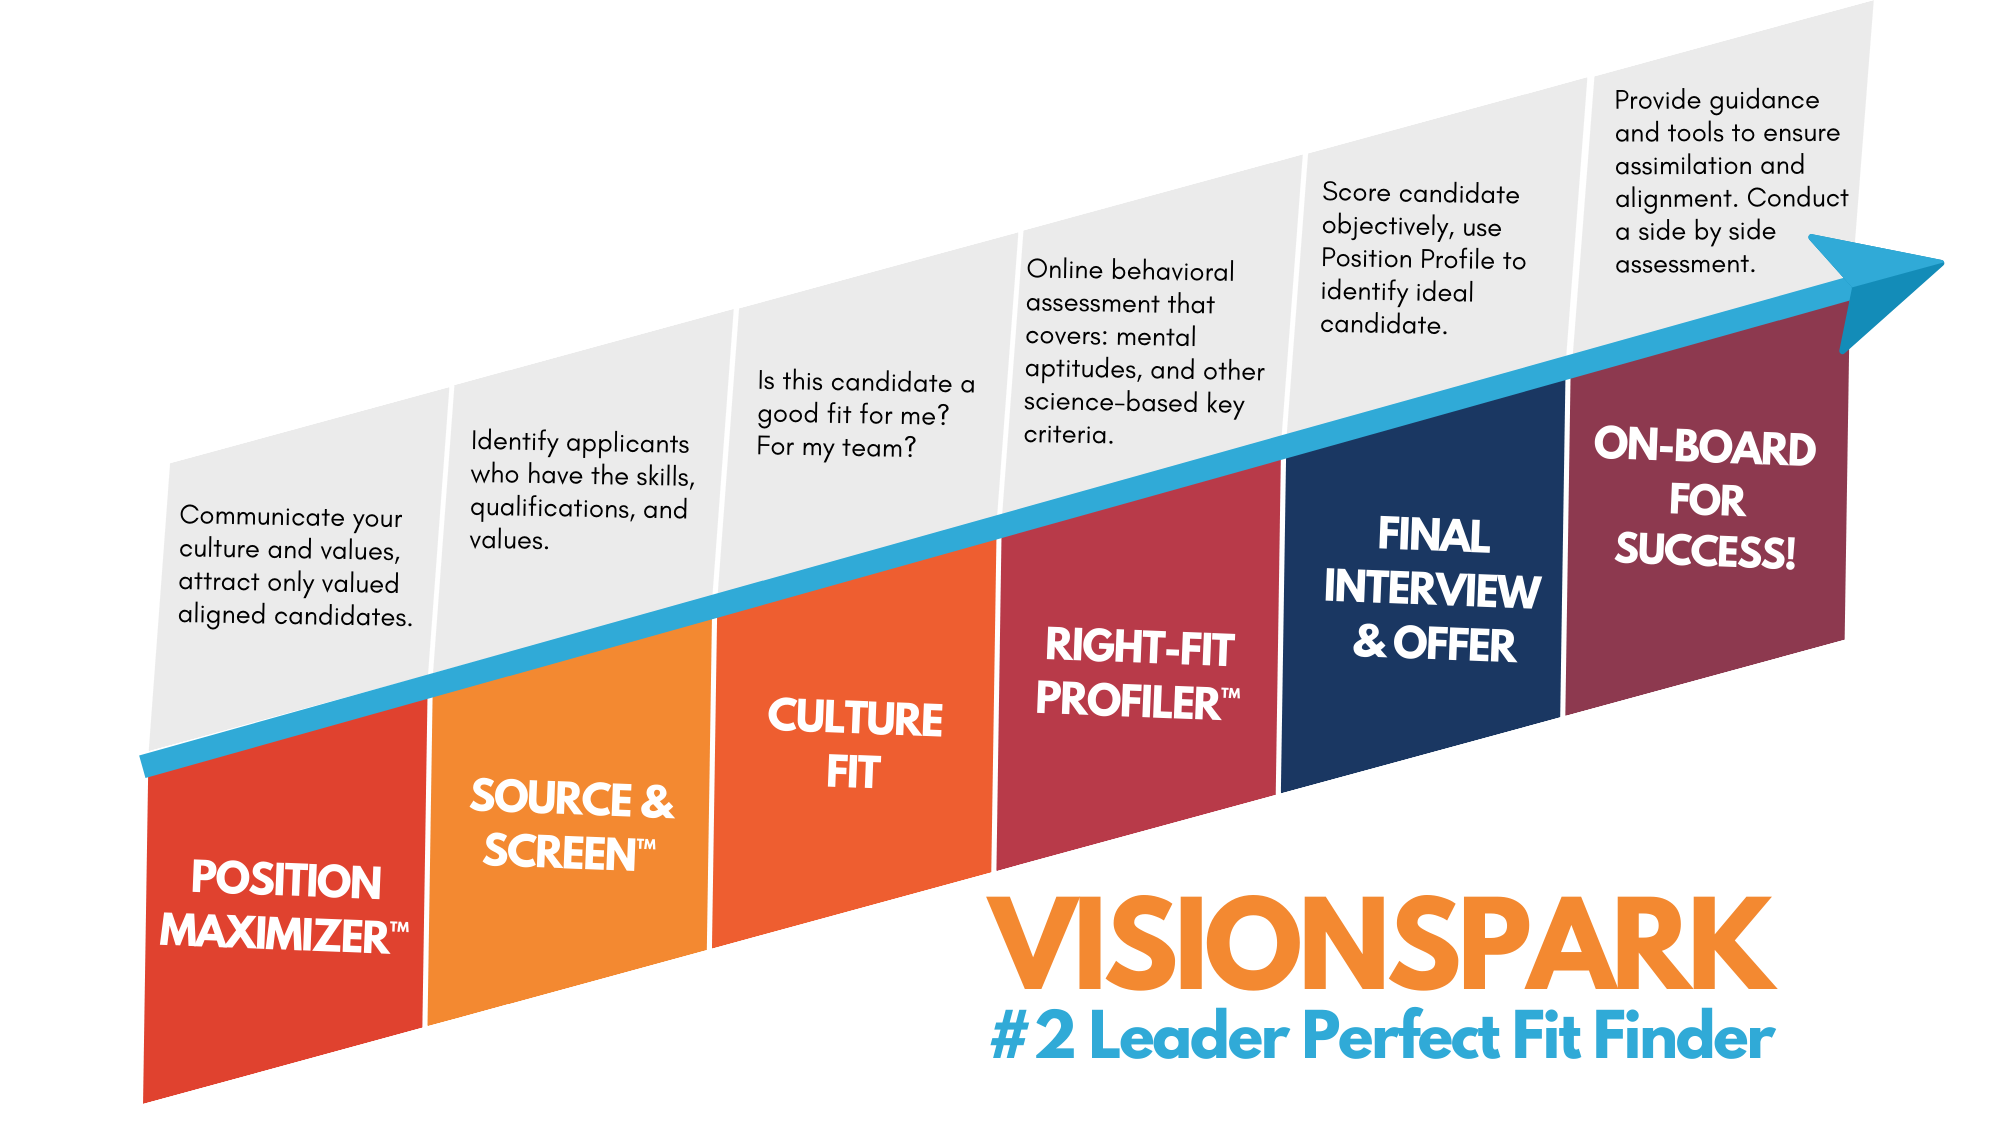 The #2 Leader Perfect Fit Finder: 1) Position Maximizer 2) Source & Screen 3) Culture Fit 4) Right Fit Profiler 5) Final Interview & Offer 6) Onboard for Success